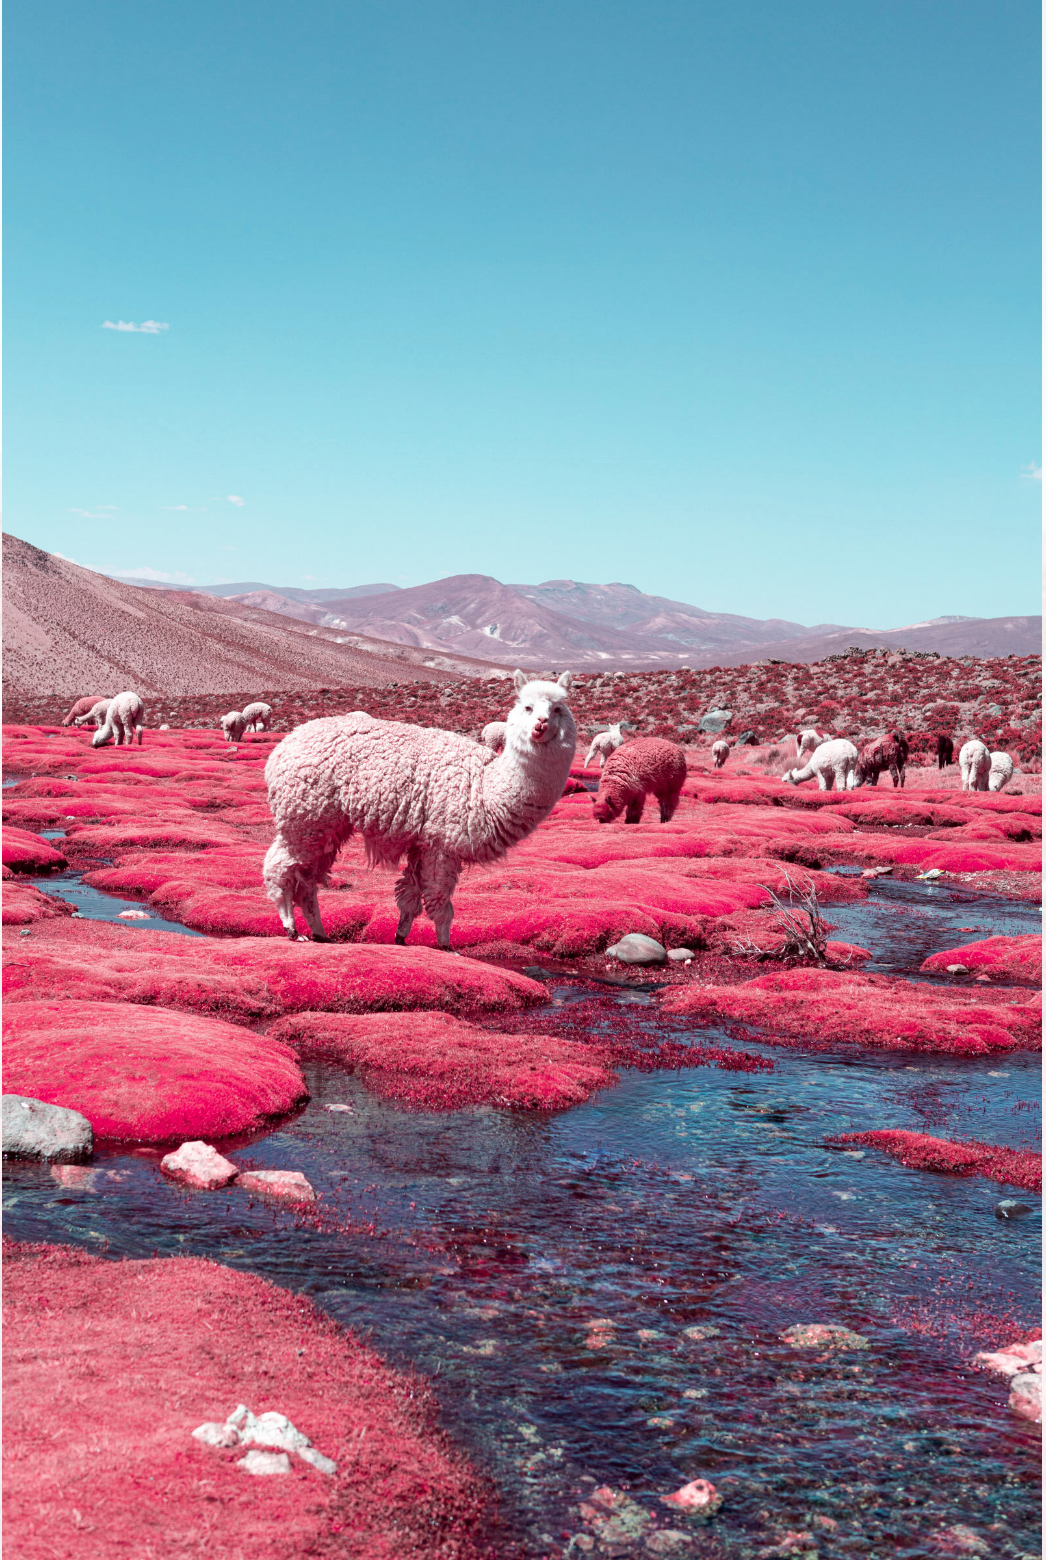 INFRARED - Paolo Pettgiani makes us see "INFRARED"